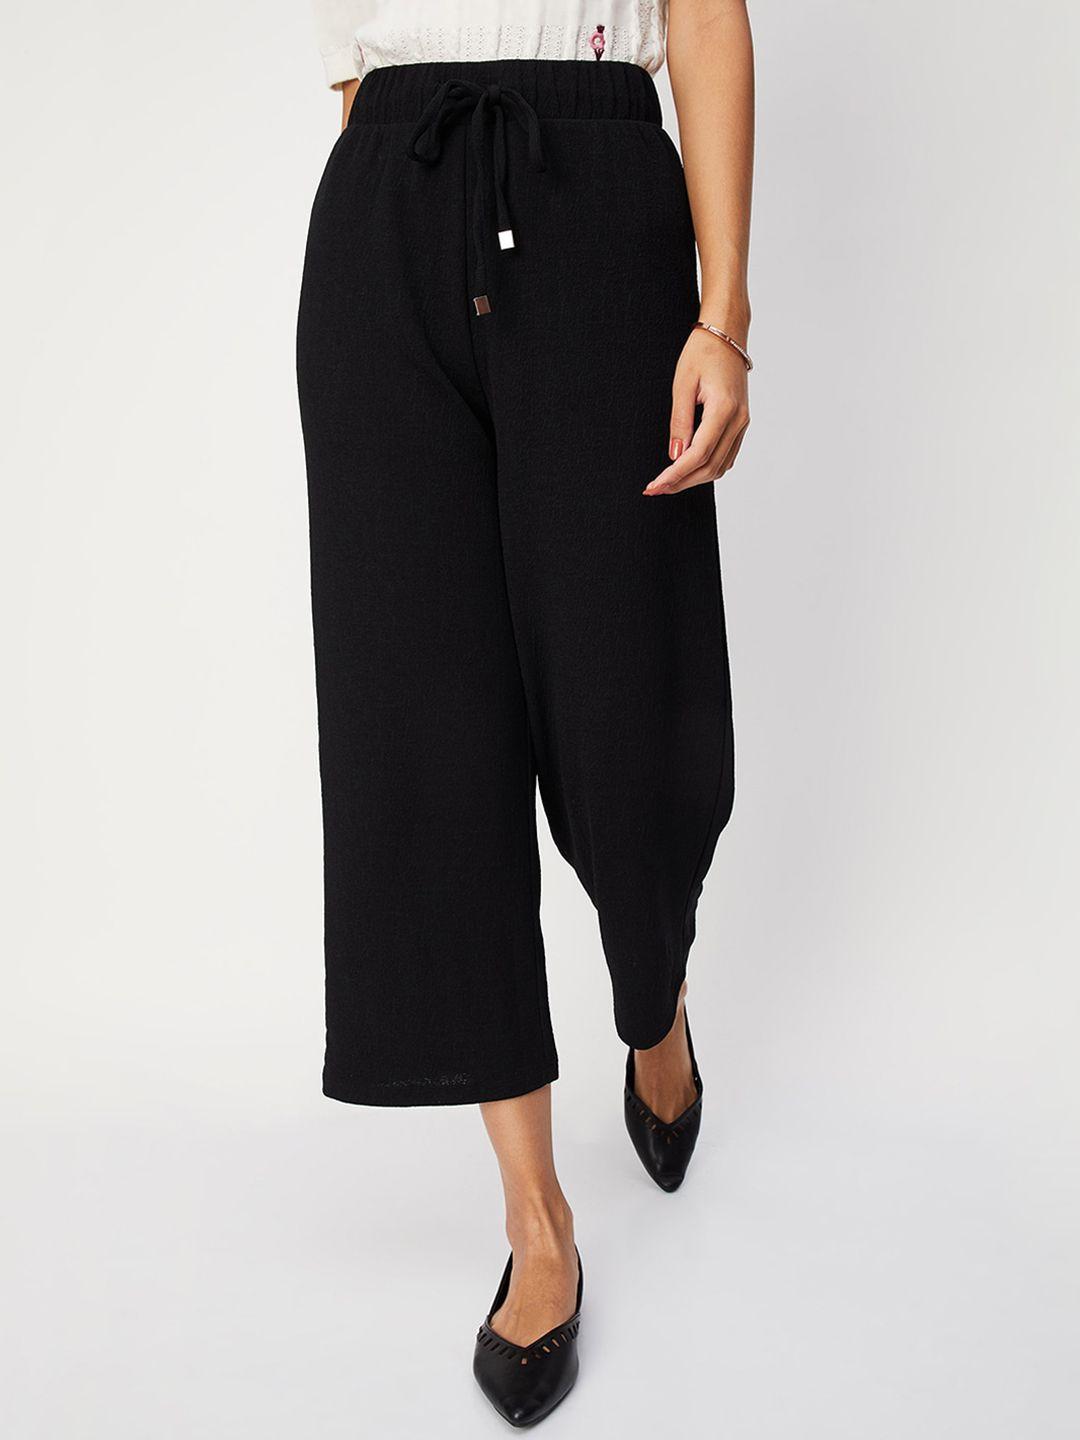 max women mid-rise culottes trousers